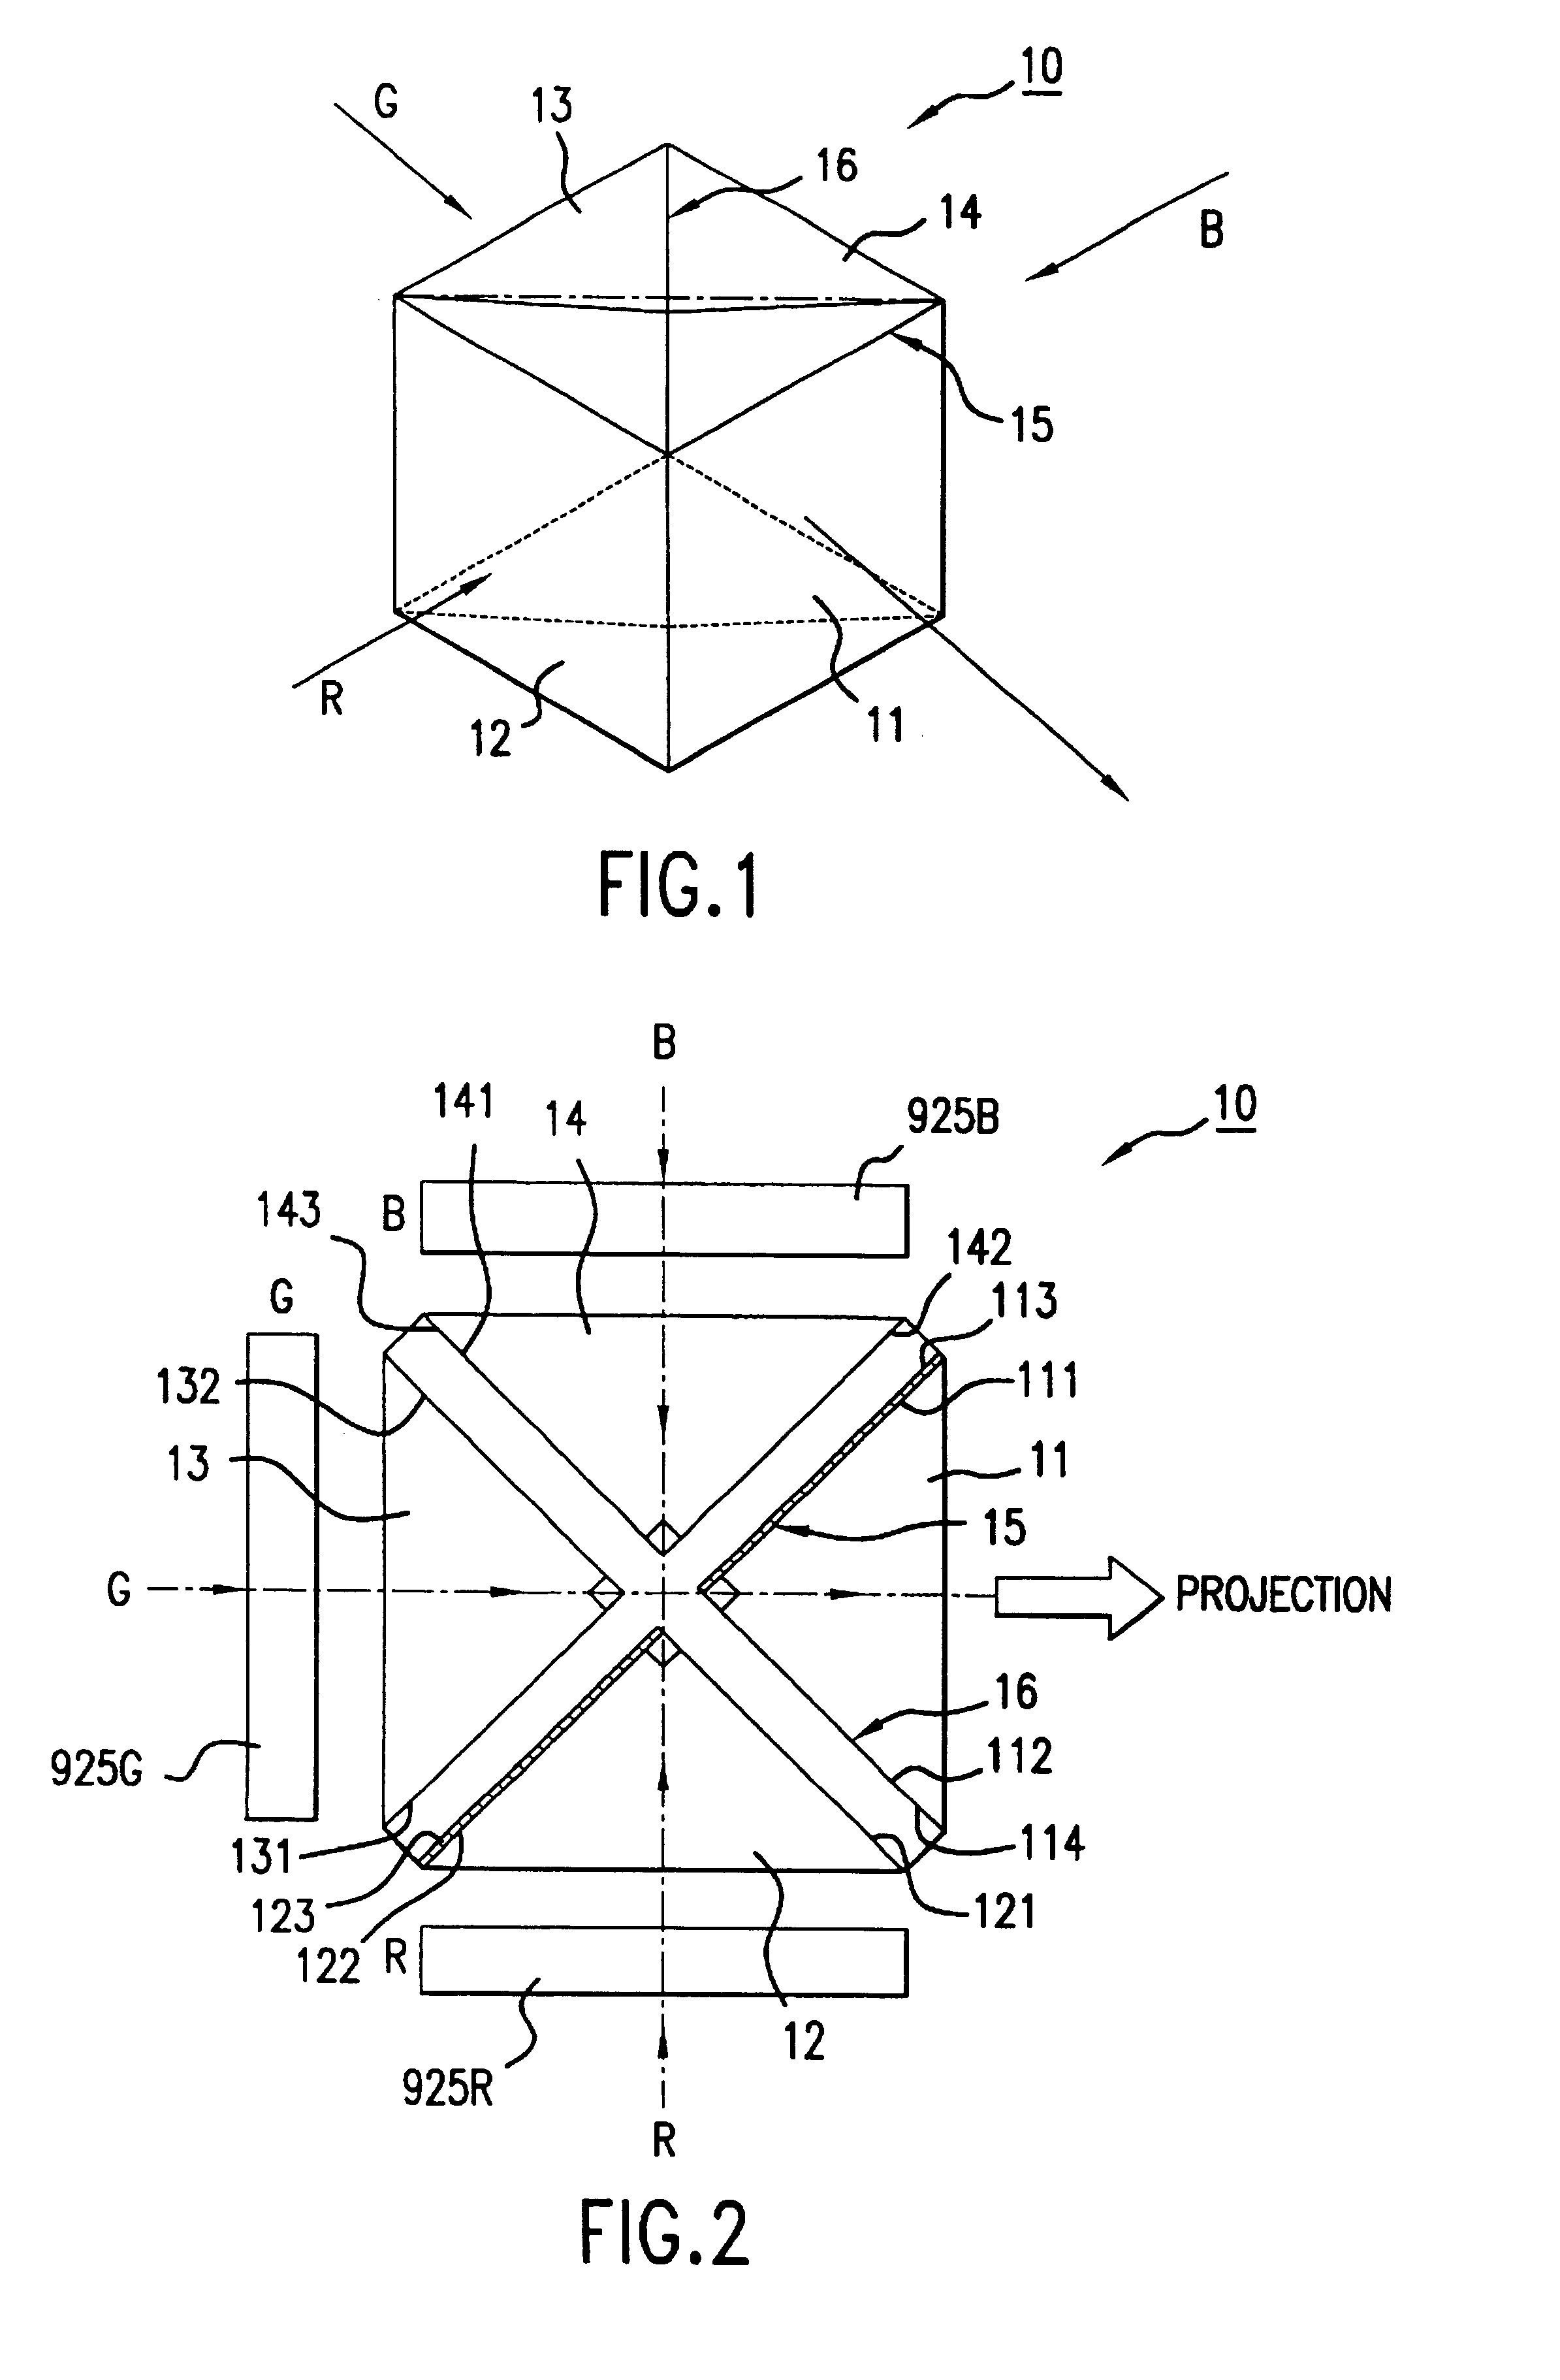 Dichroic prism and projection display apparatus